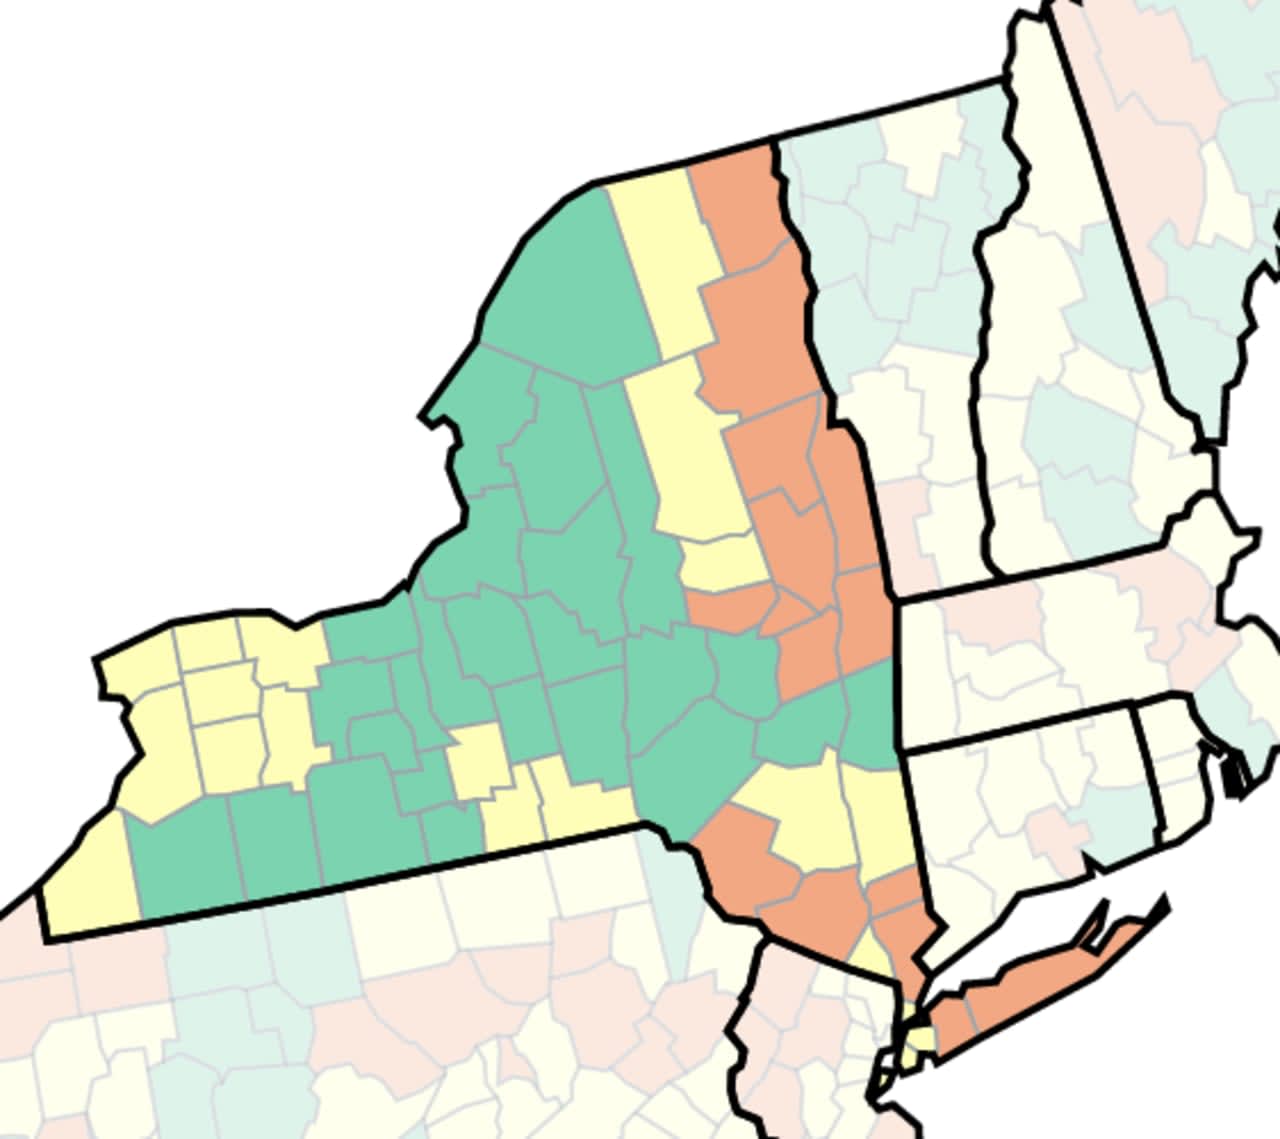 The CDC's COVID-19 risk map in New York